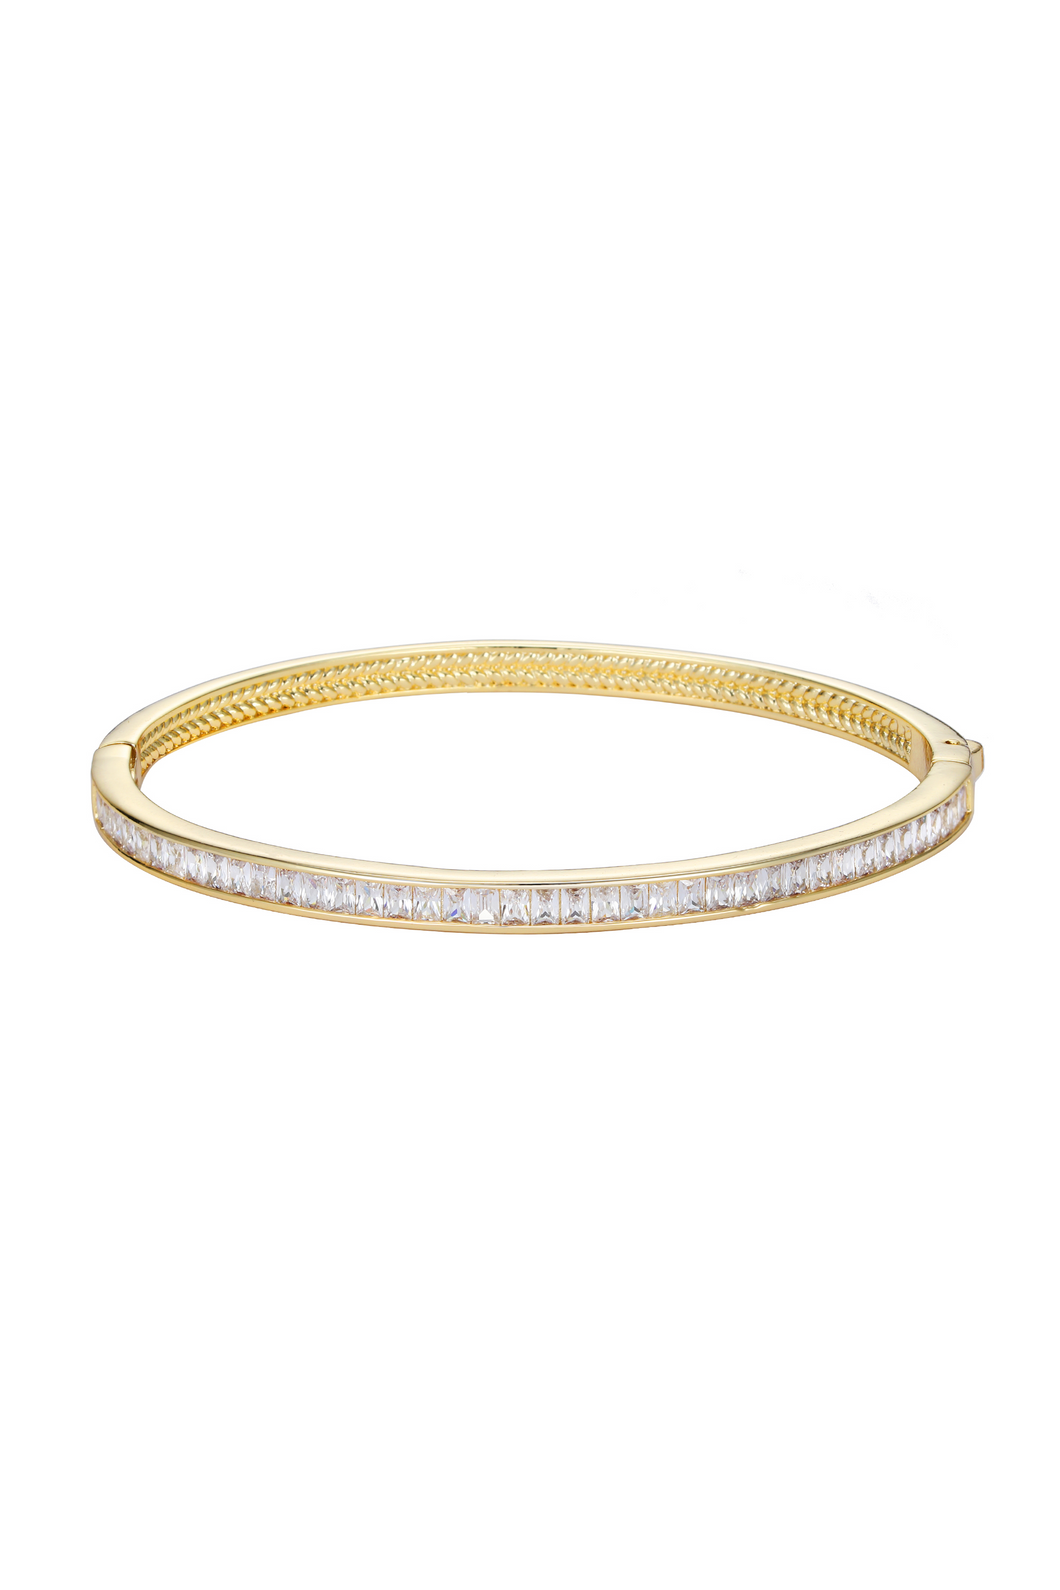 Gold Bangle with Emerald Cut Cubic Zirconia